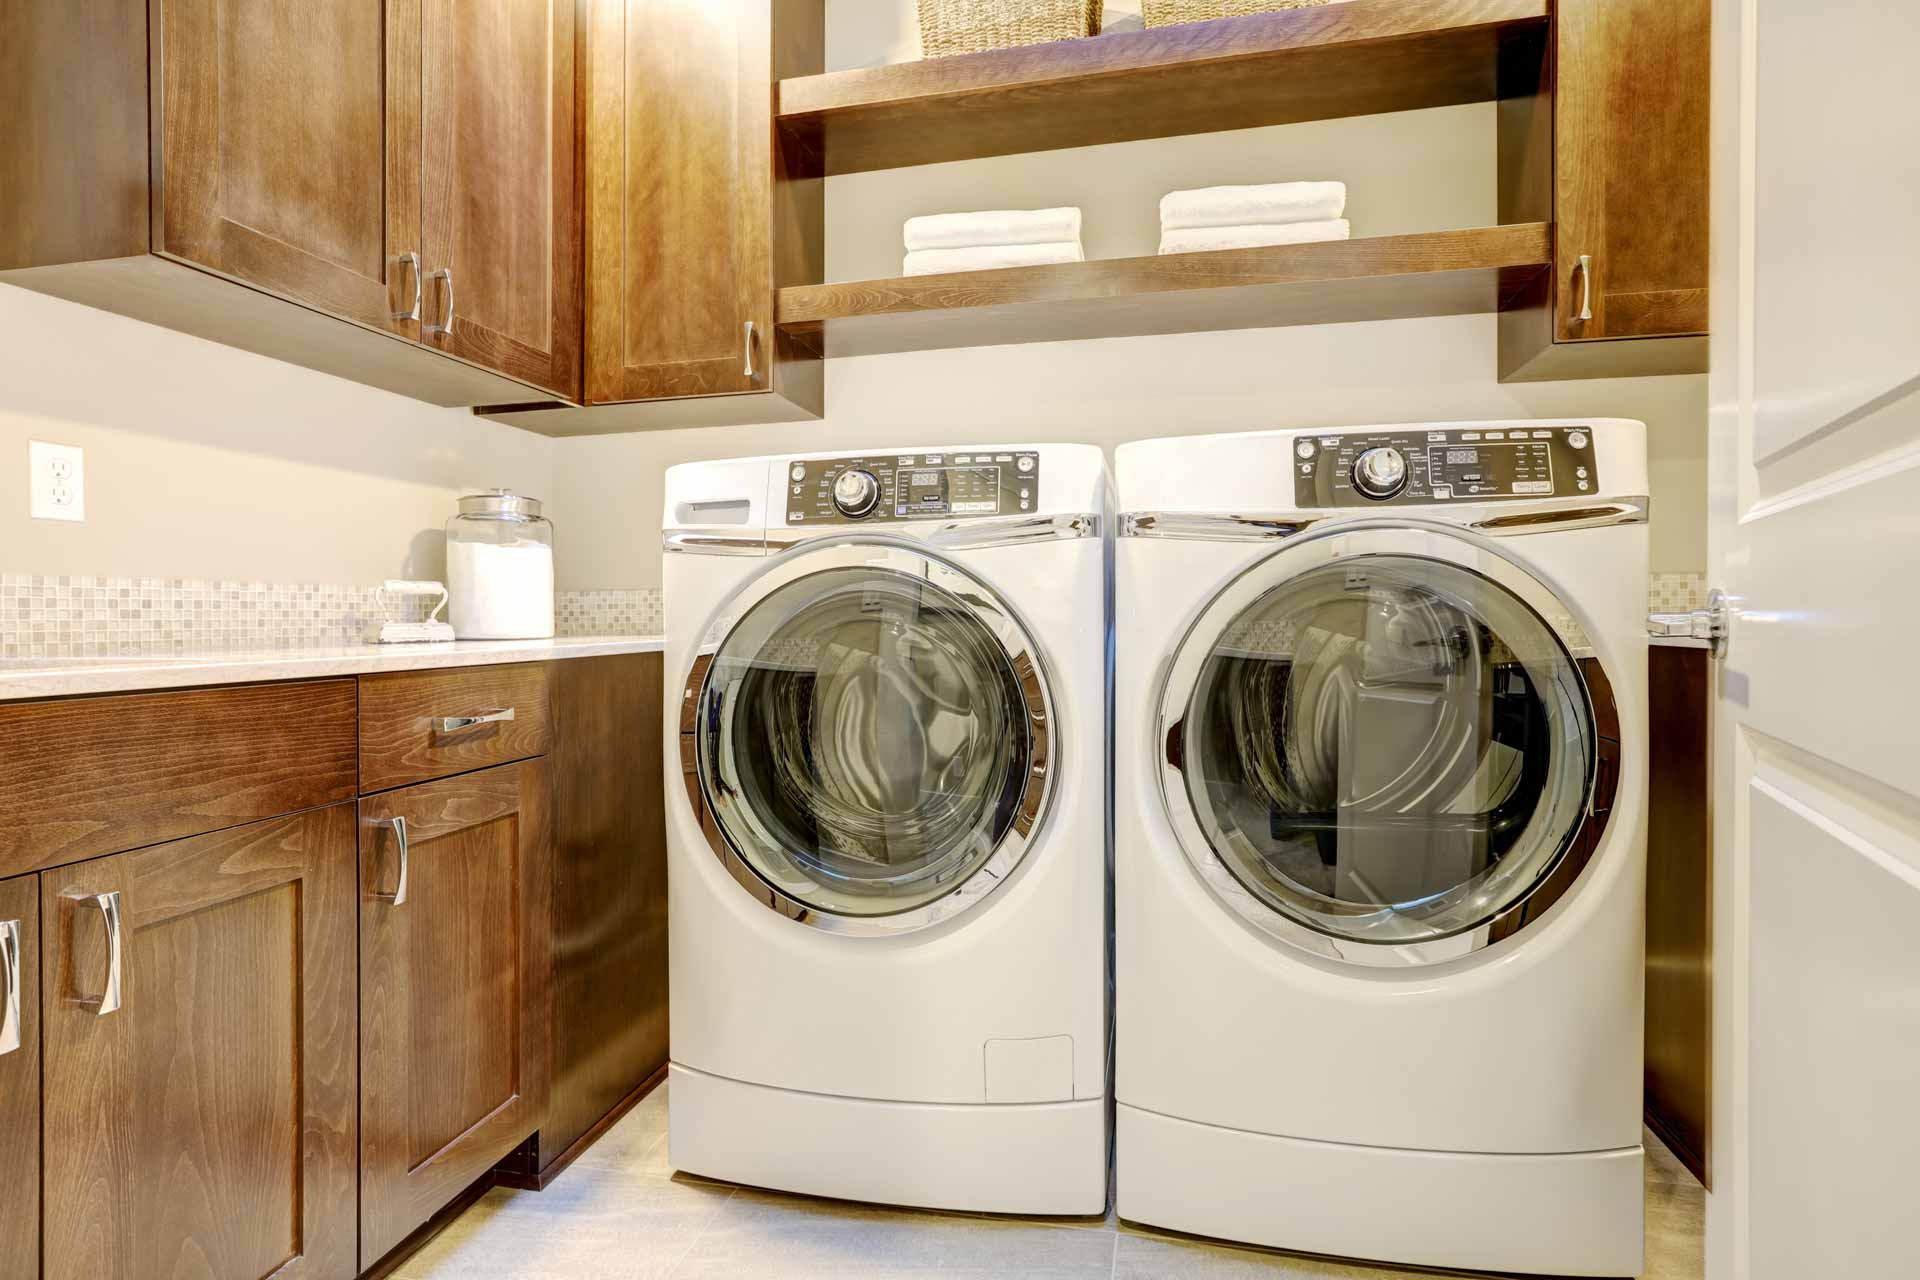 Washer/dryer set in a laundry room